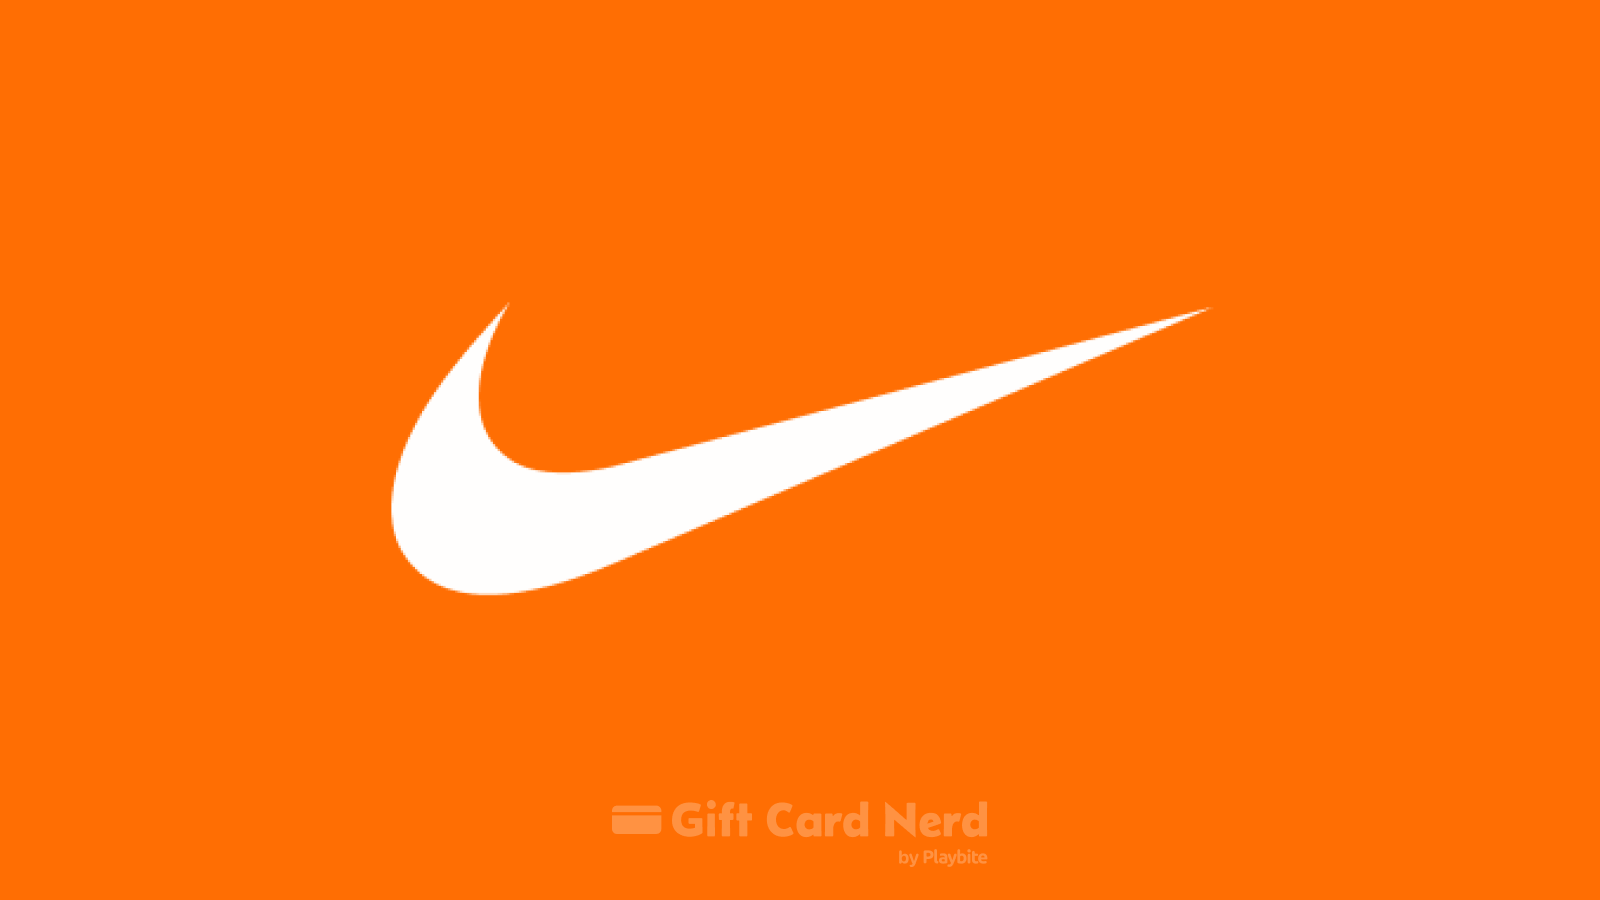 Can I Use a Nike Gift Card on Google Play Store?